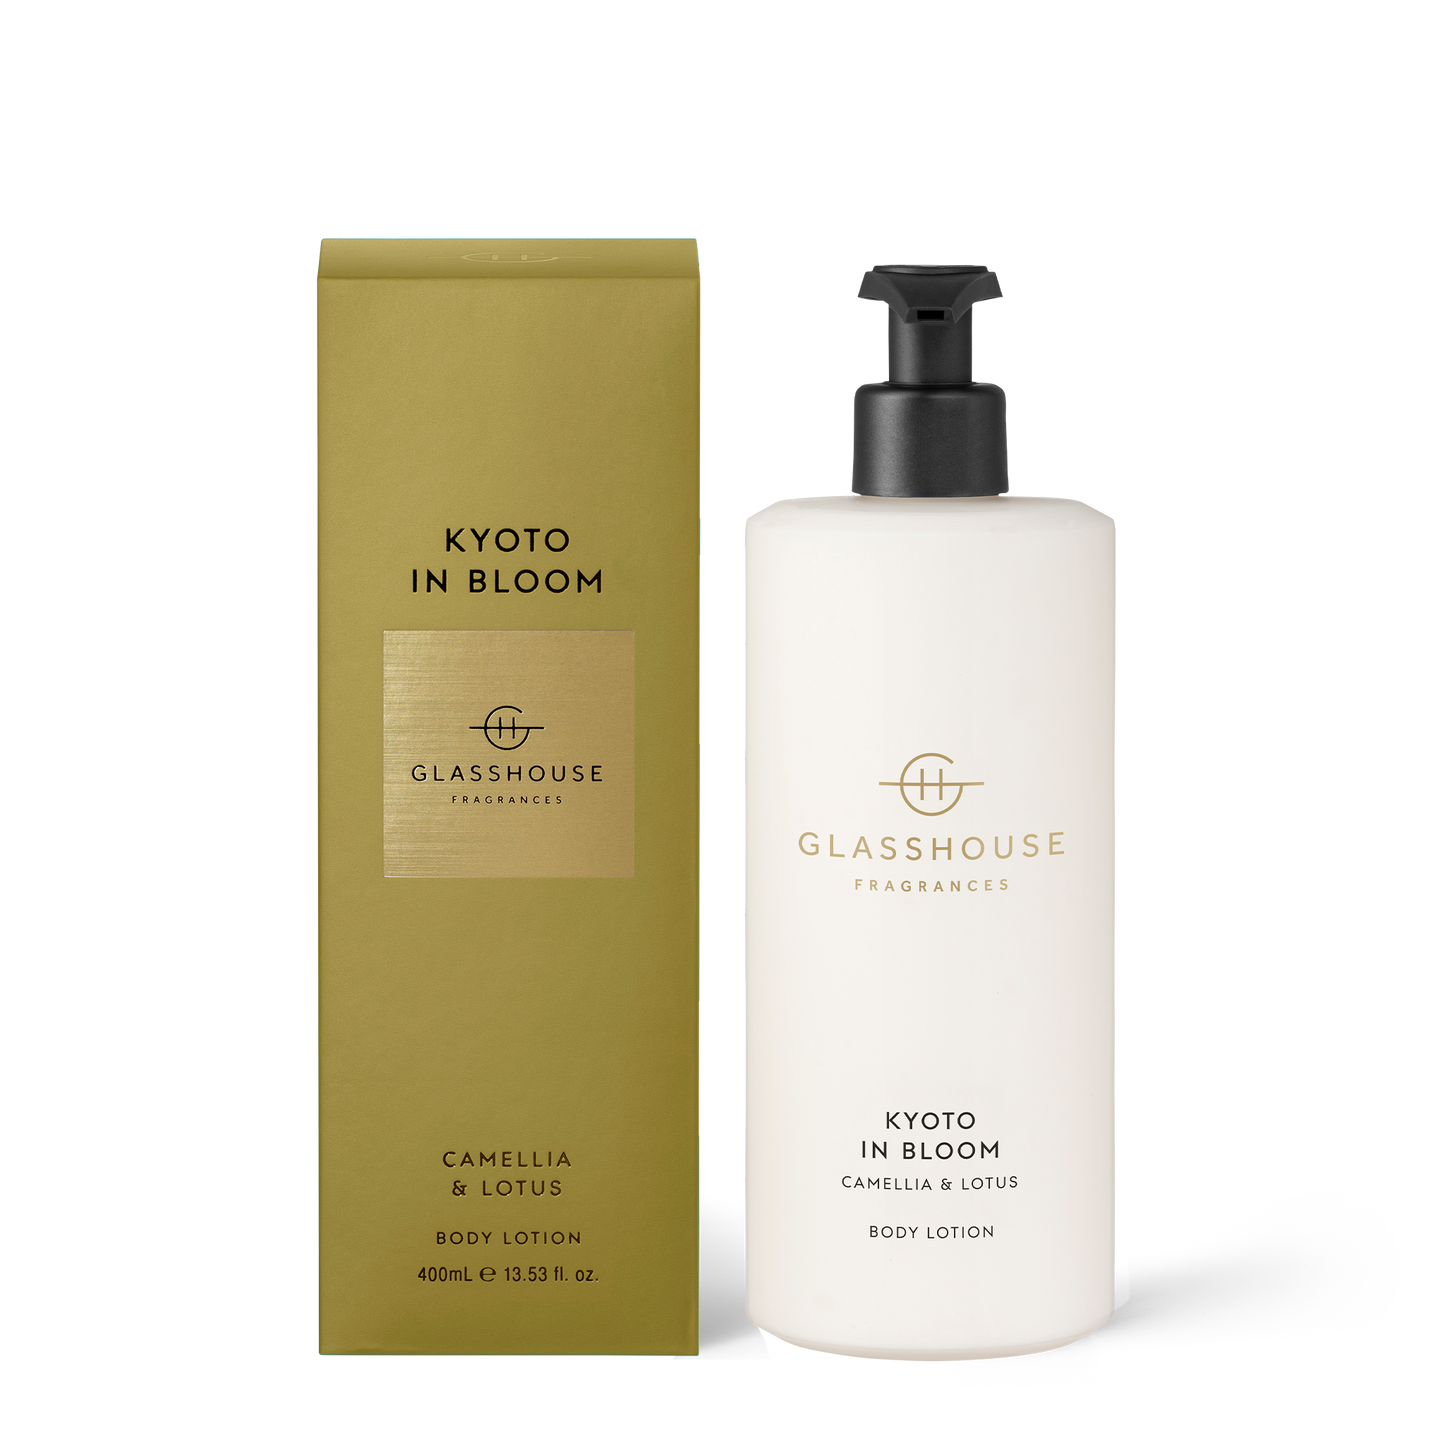 Kyoto In Bloom Body Lotion 400ml